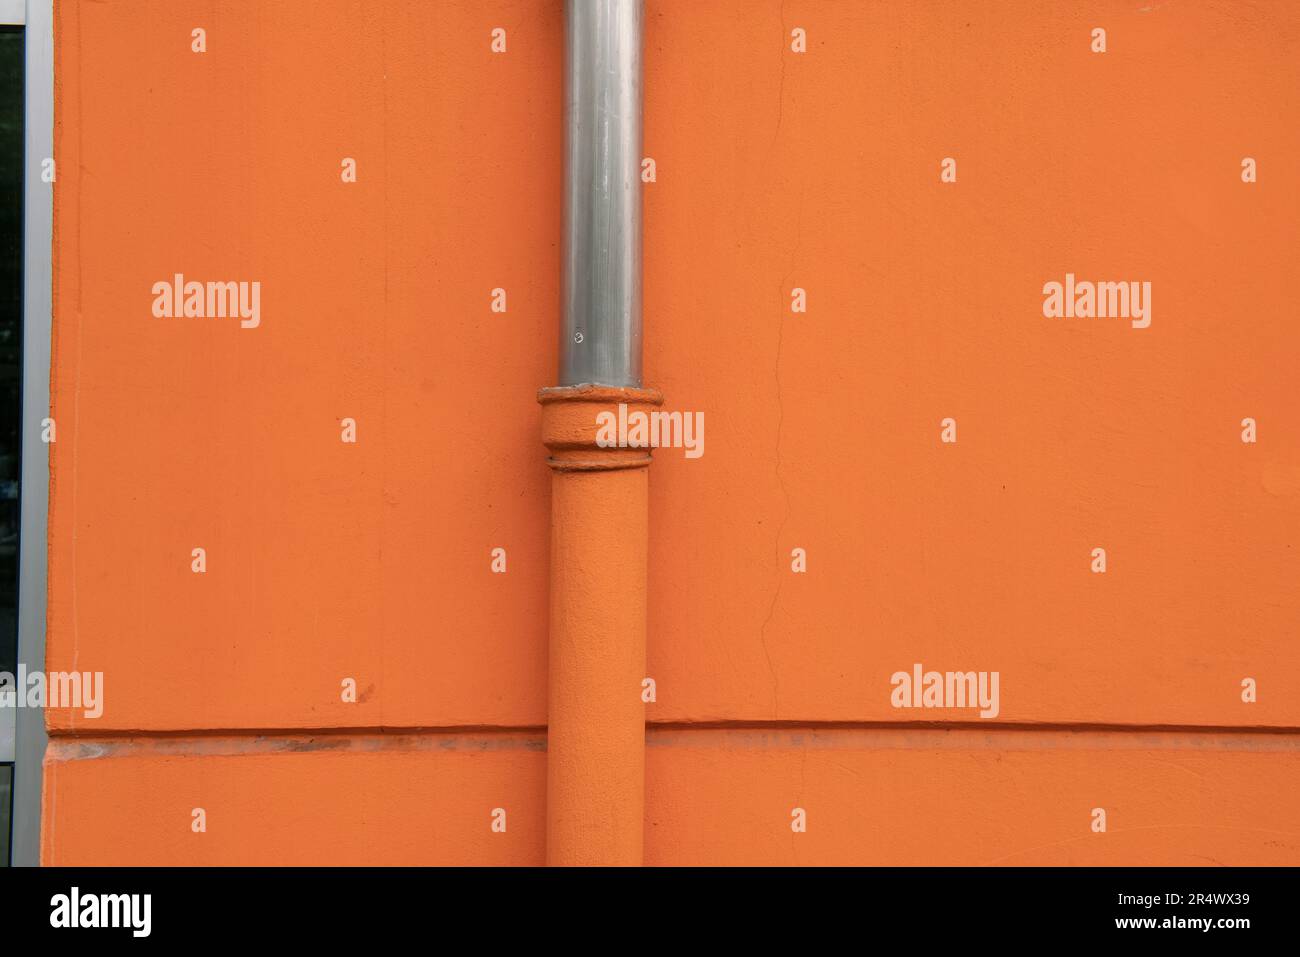 eaves or downspout, particular house of the facade on a building with orange plaster. stainless steel water drain pipes Stock Photo